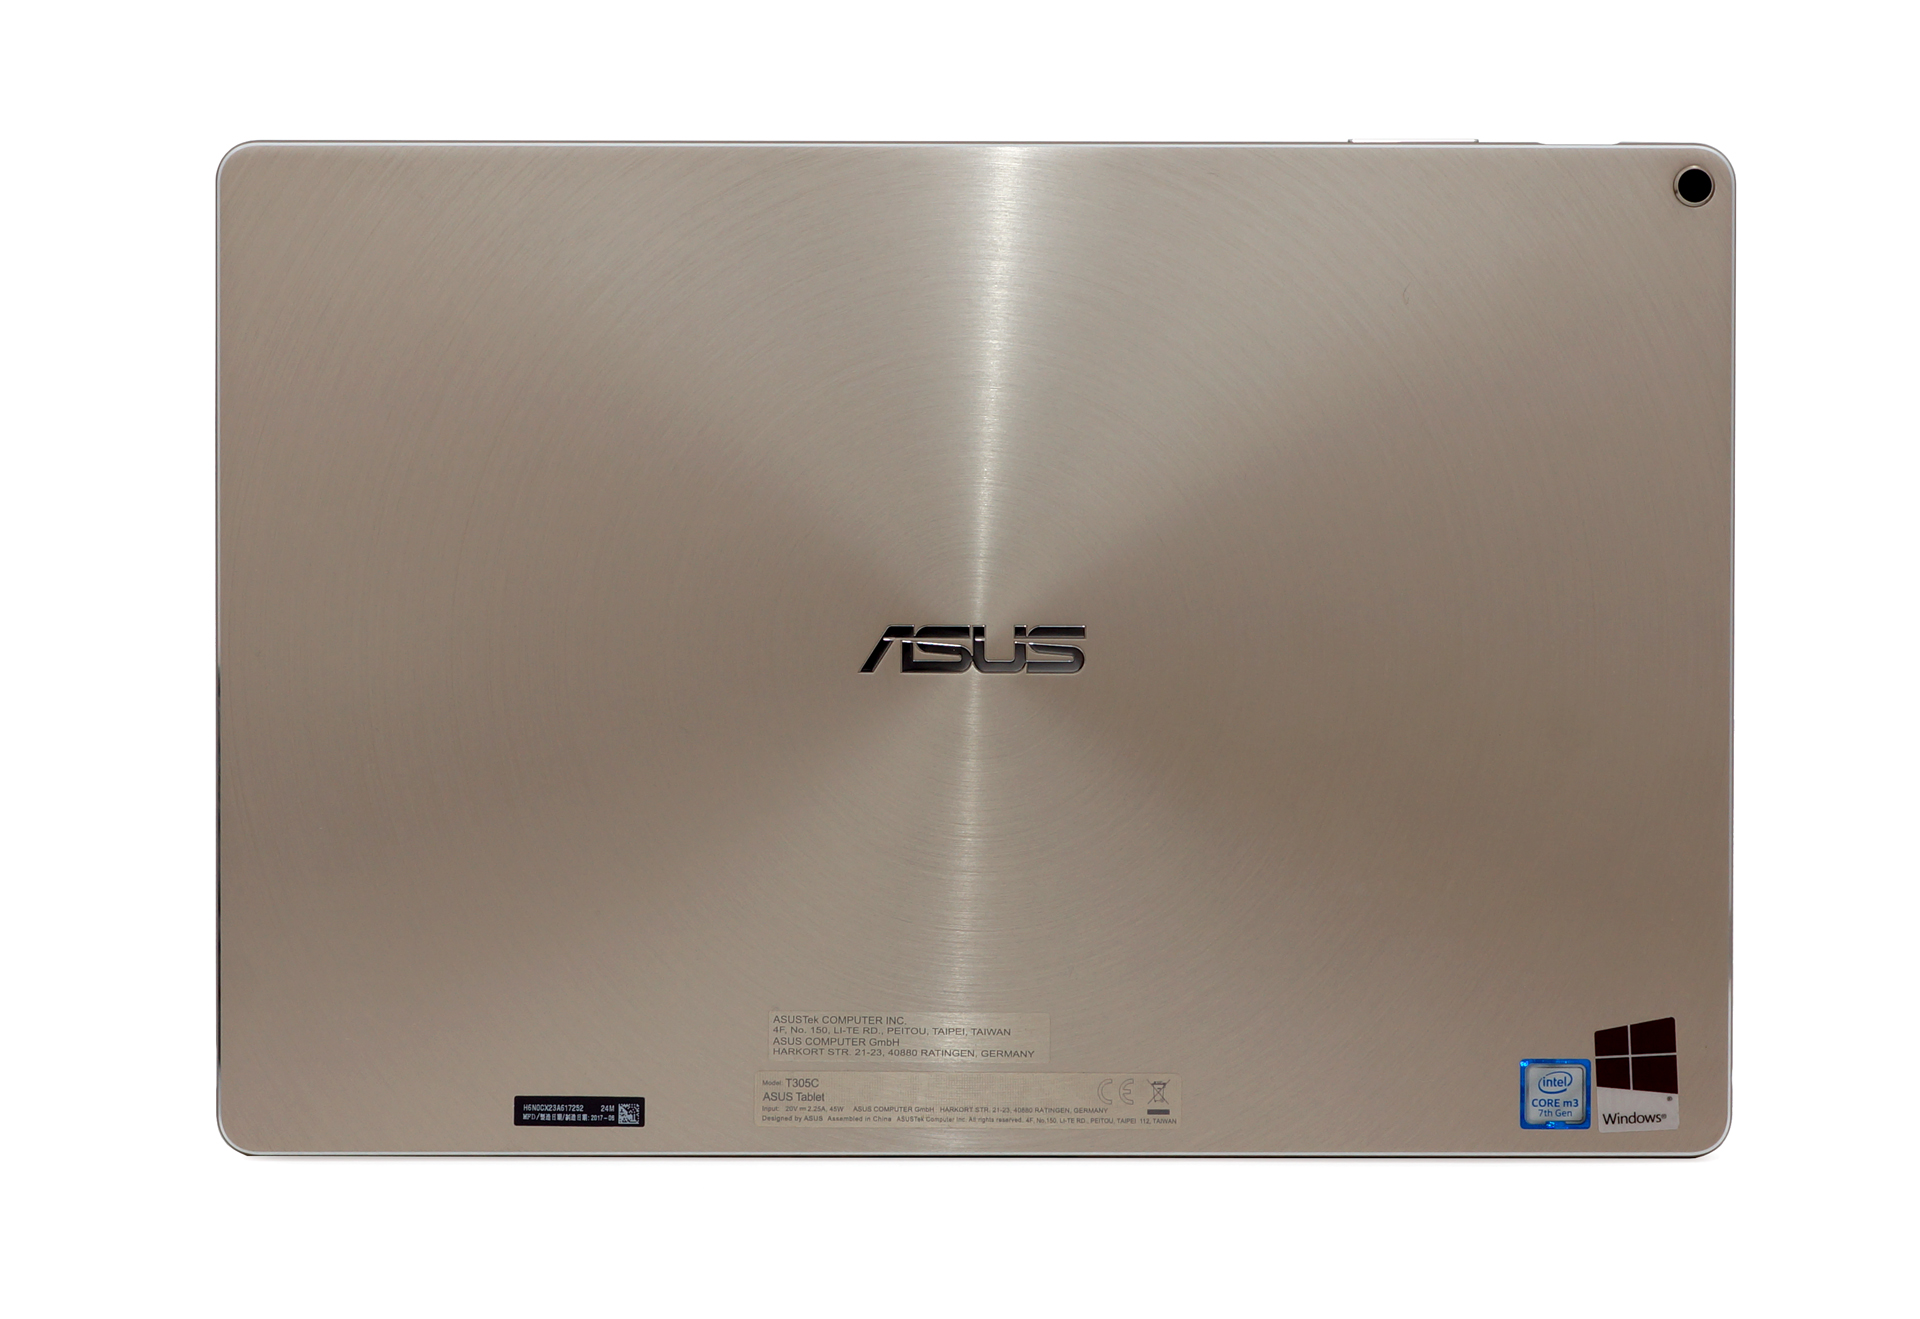 ASUS Transformer 3 T305CA review - the iPad Pro competitor with